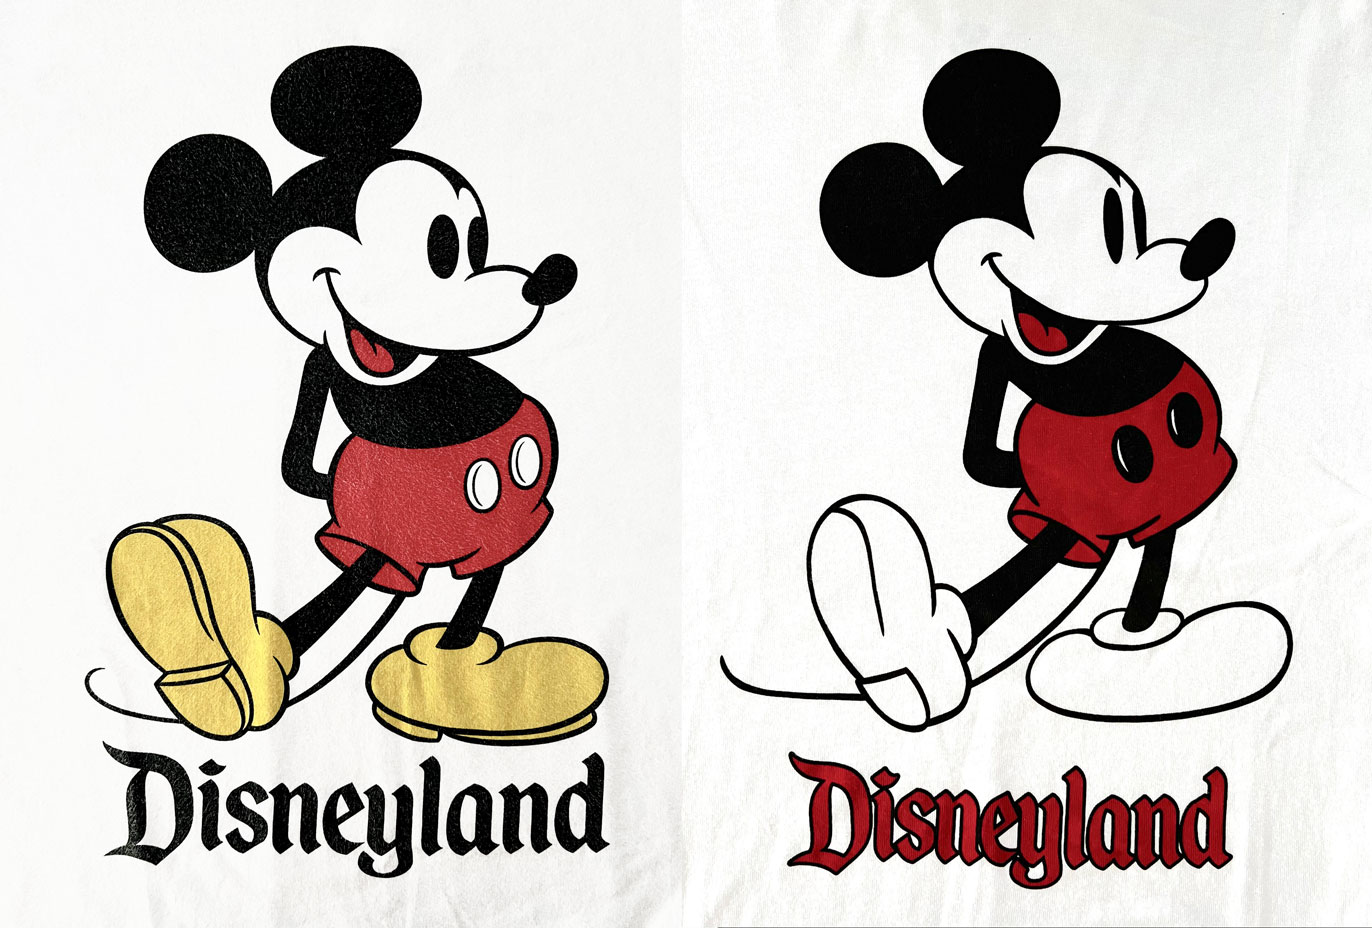 Mickey, Disney, and the Public Domain: a 95-year Love Triangle